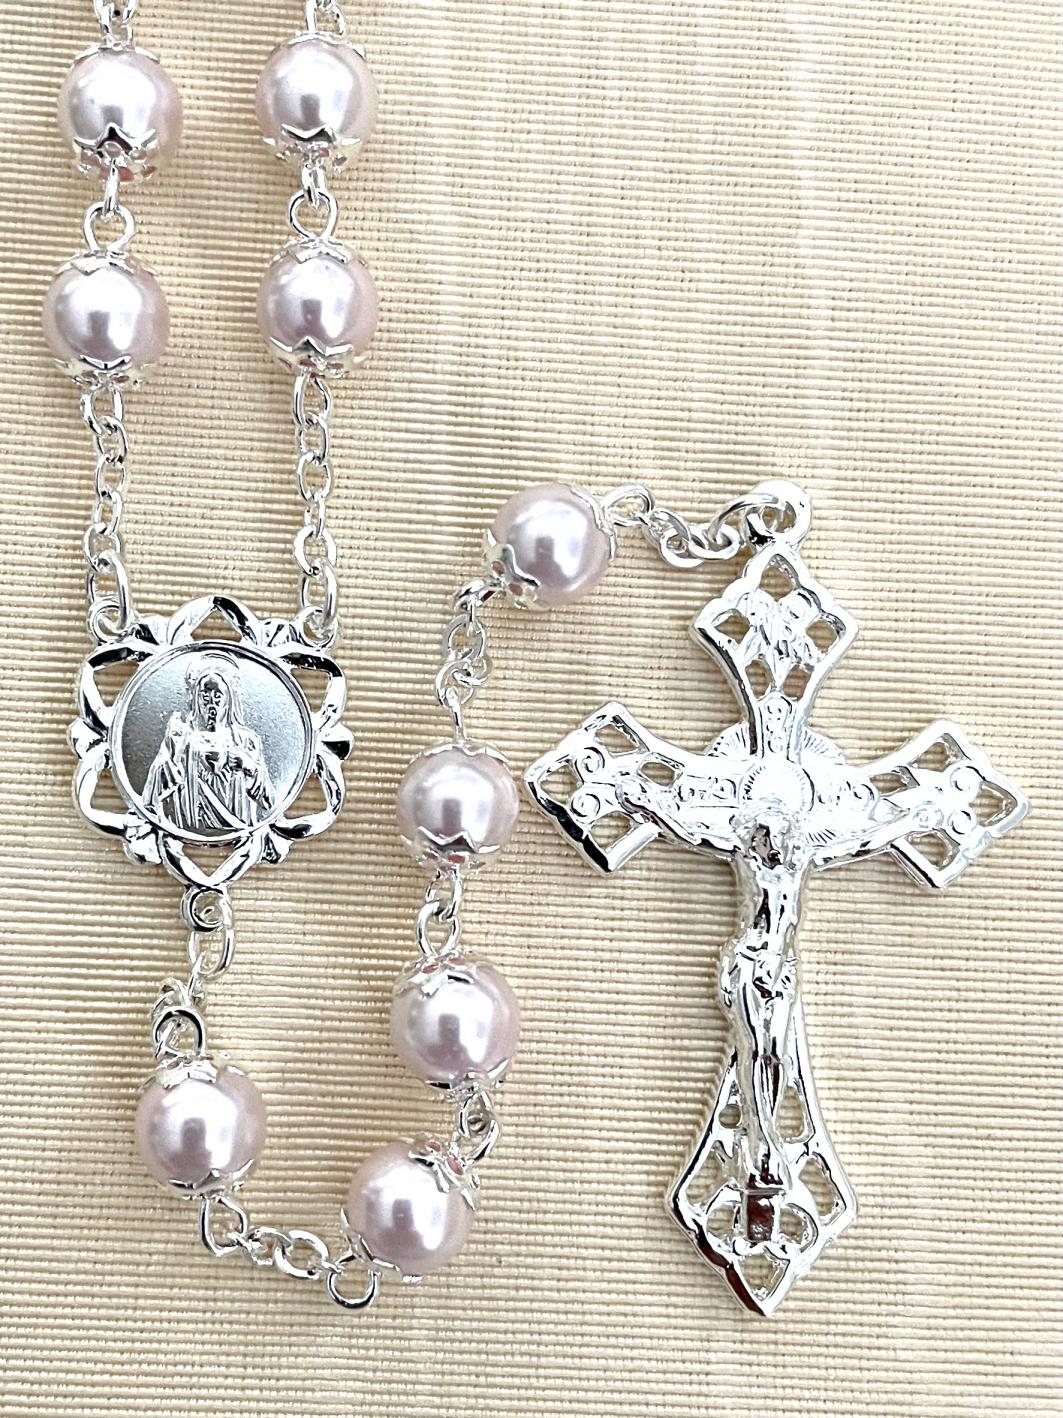 7mm PINK PEARL DOUBLE CAPPED ROSARY WITH STERLING SILVER PLATED CRUCIFIX AND CENTER GIFT BOXED